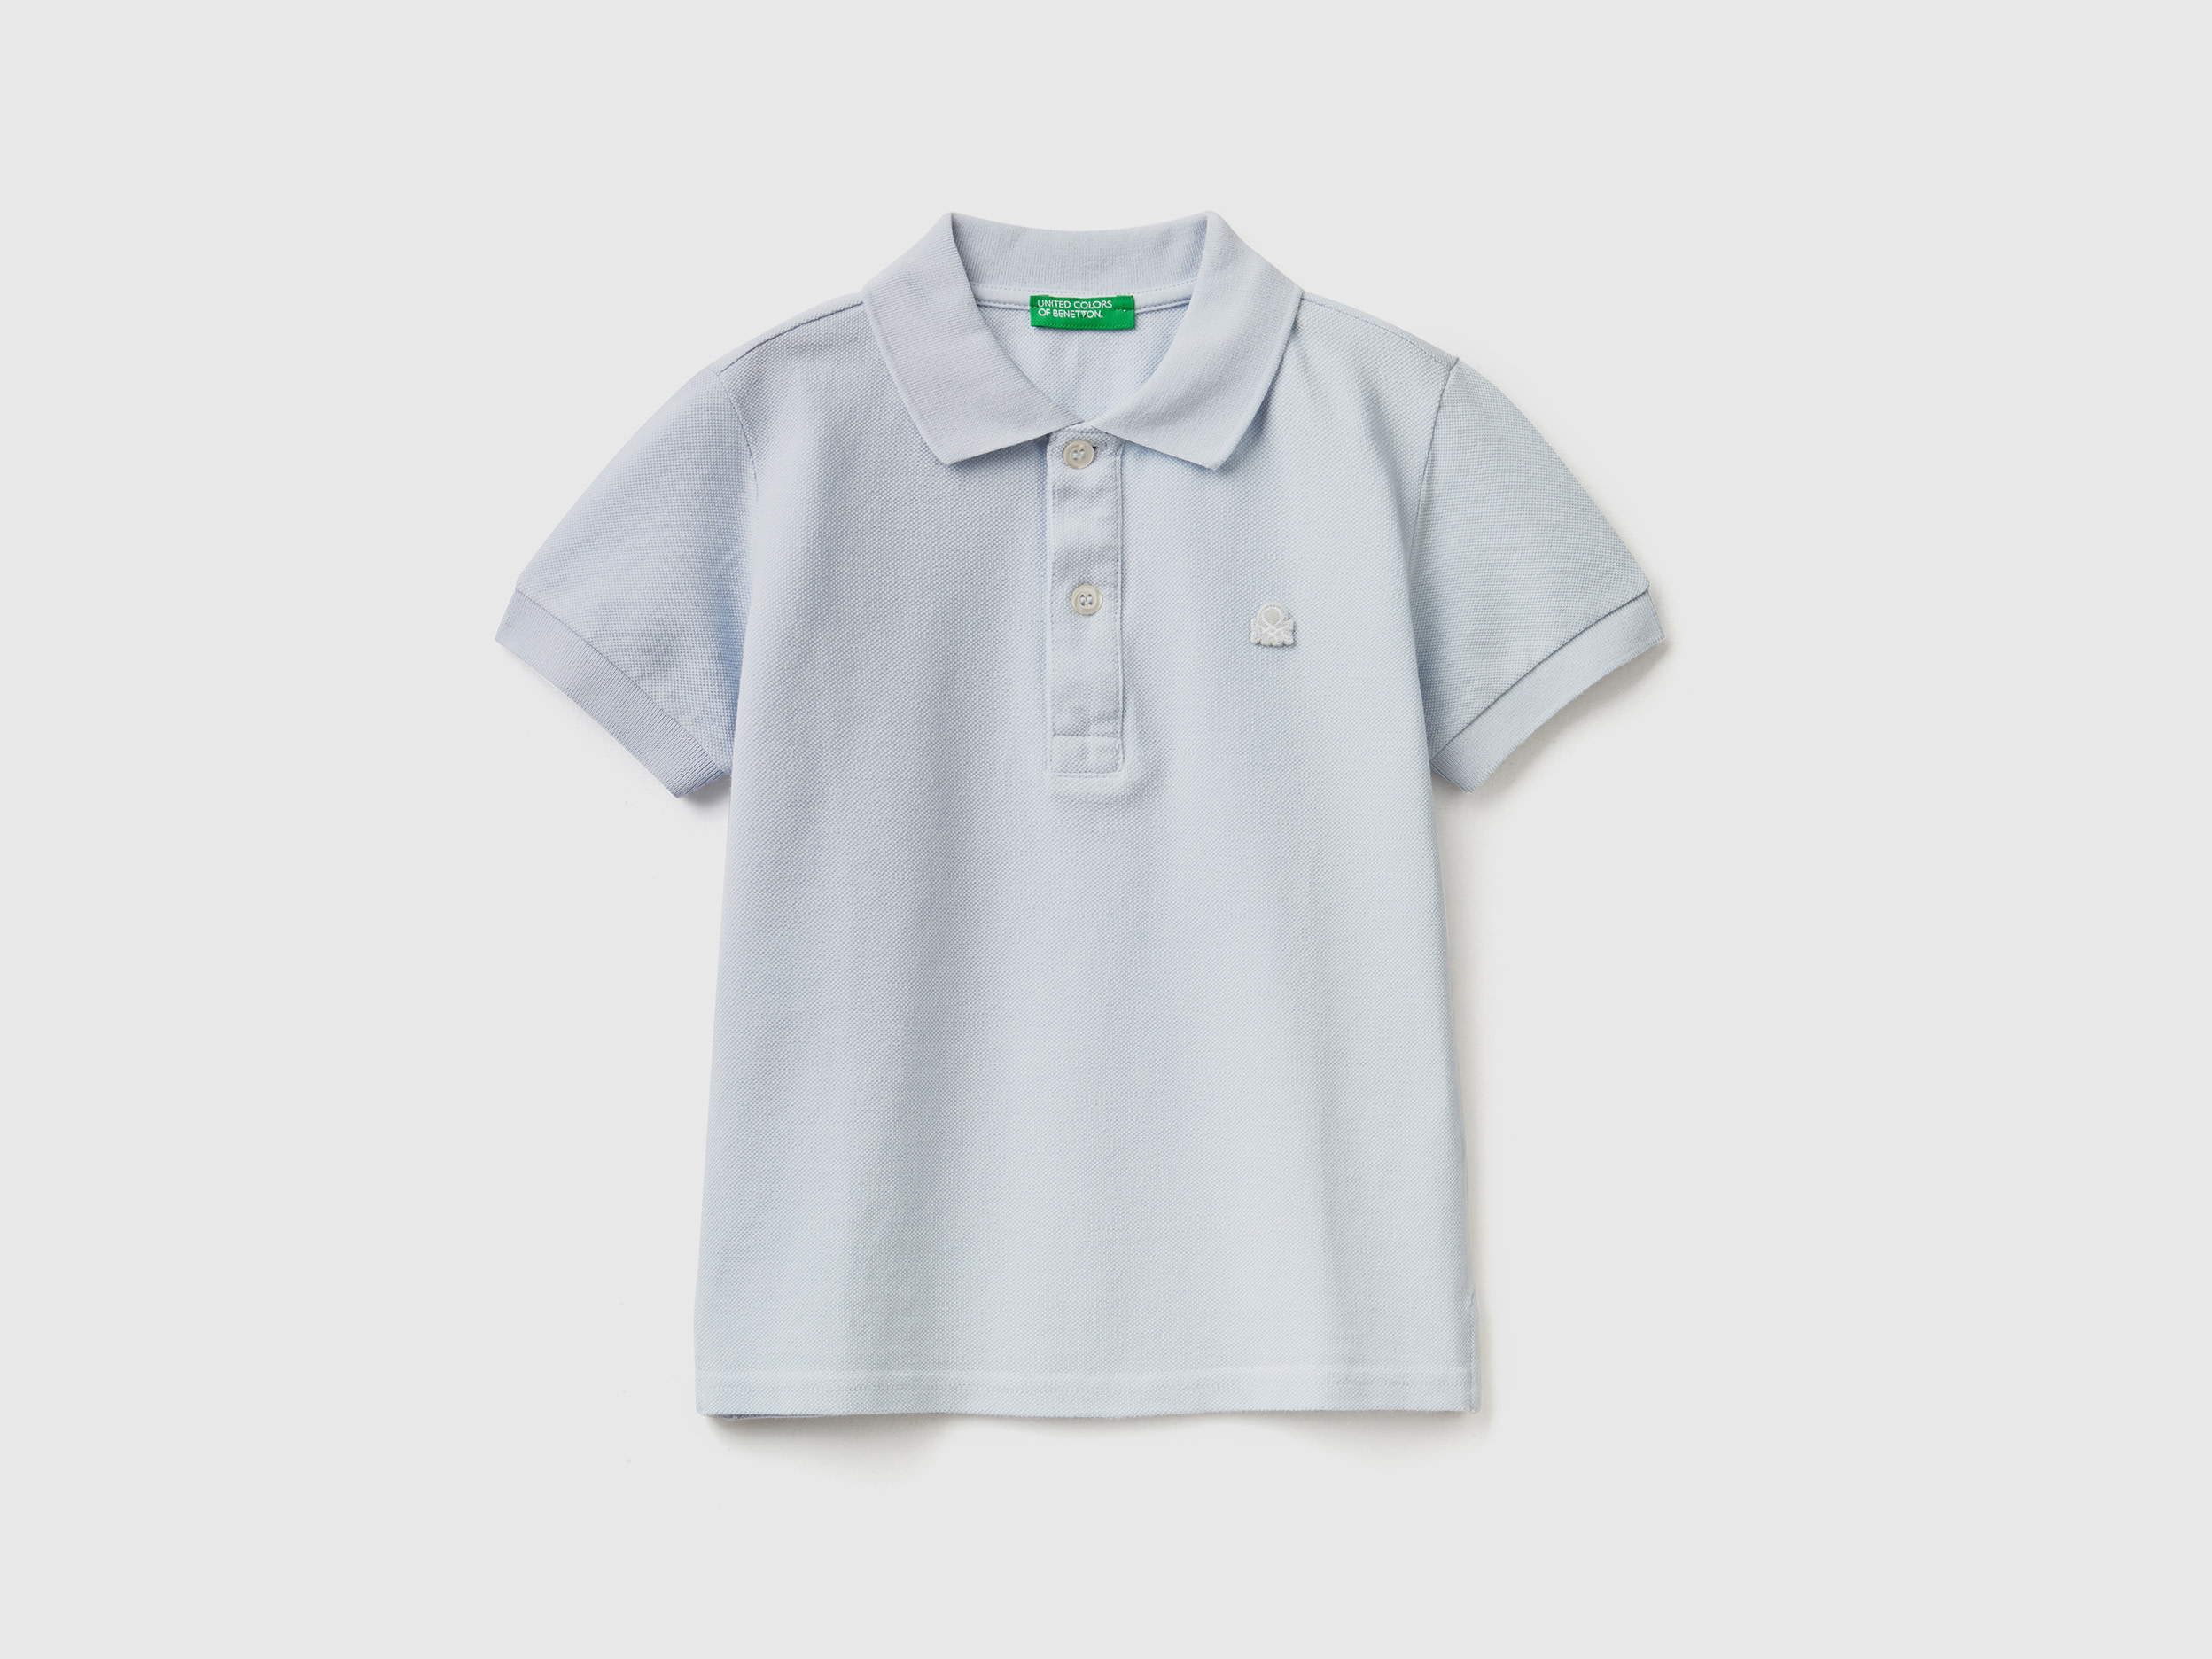 Image of Benetton, Short Sleeve Polo In Organic Cotton, size 90, Sky Blue, Kids